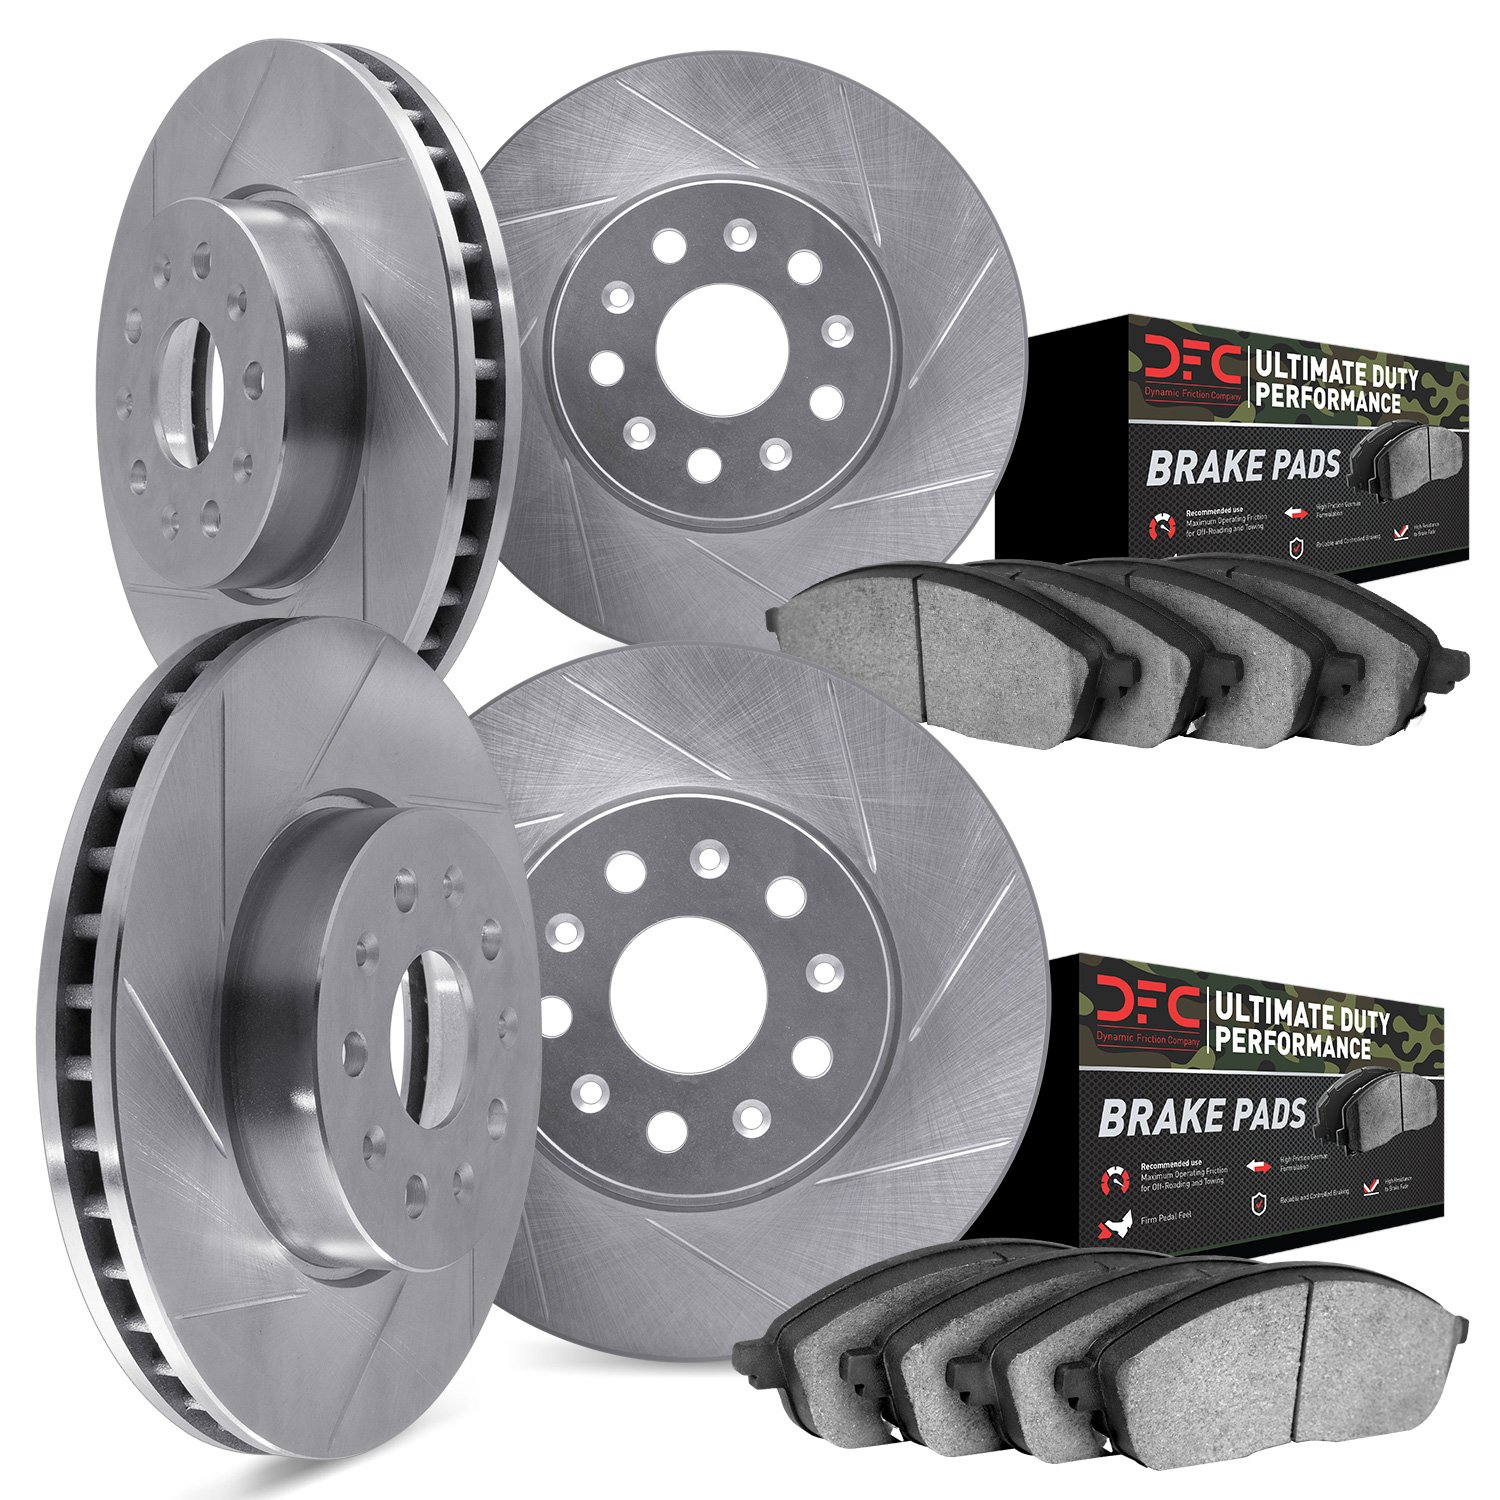 5404-03001 Slotted Brake Rotors with Ultimate-Duty Brake Pads Kit [Silver], 2010-2016 Kia/Hyundai/Genesis, Position: Front and R